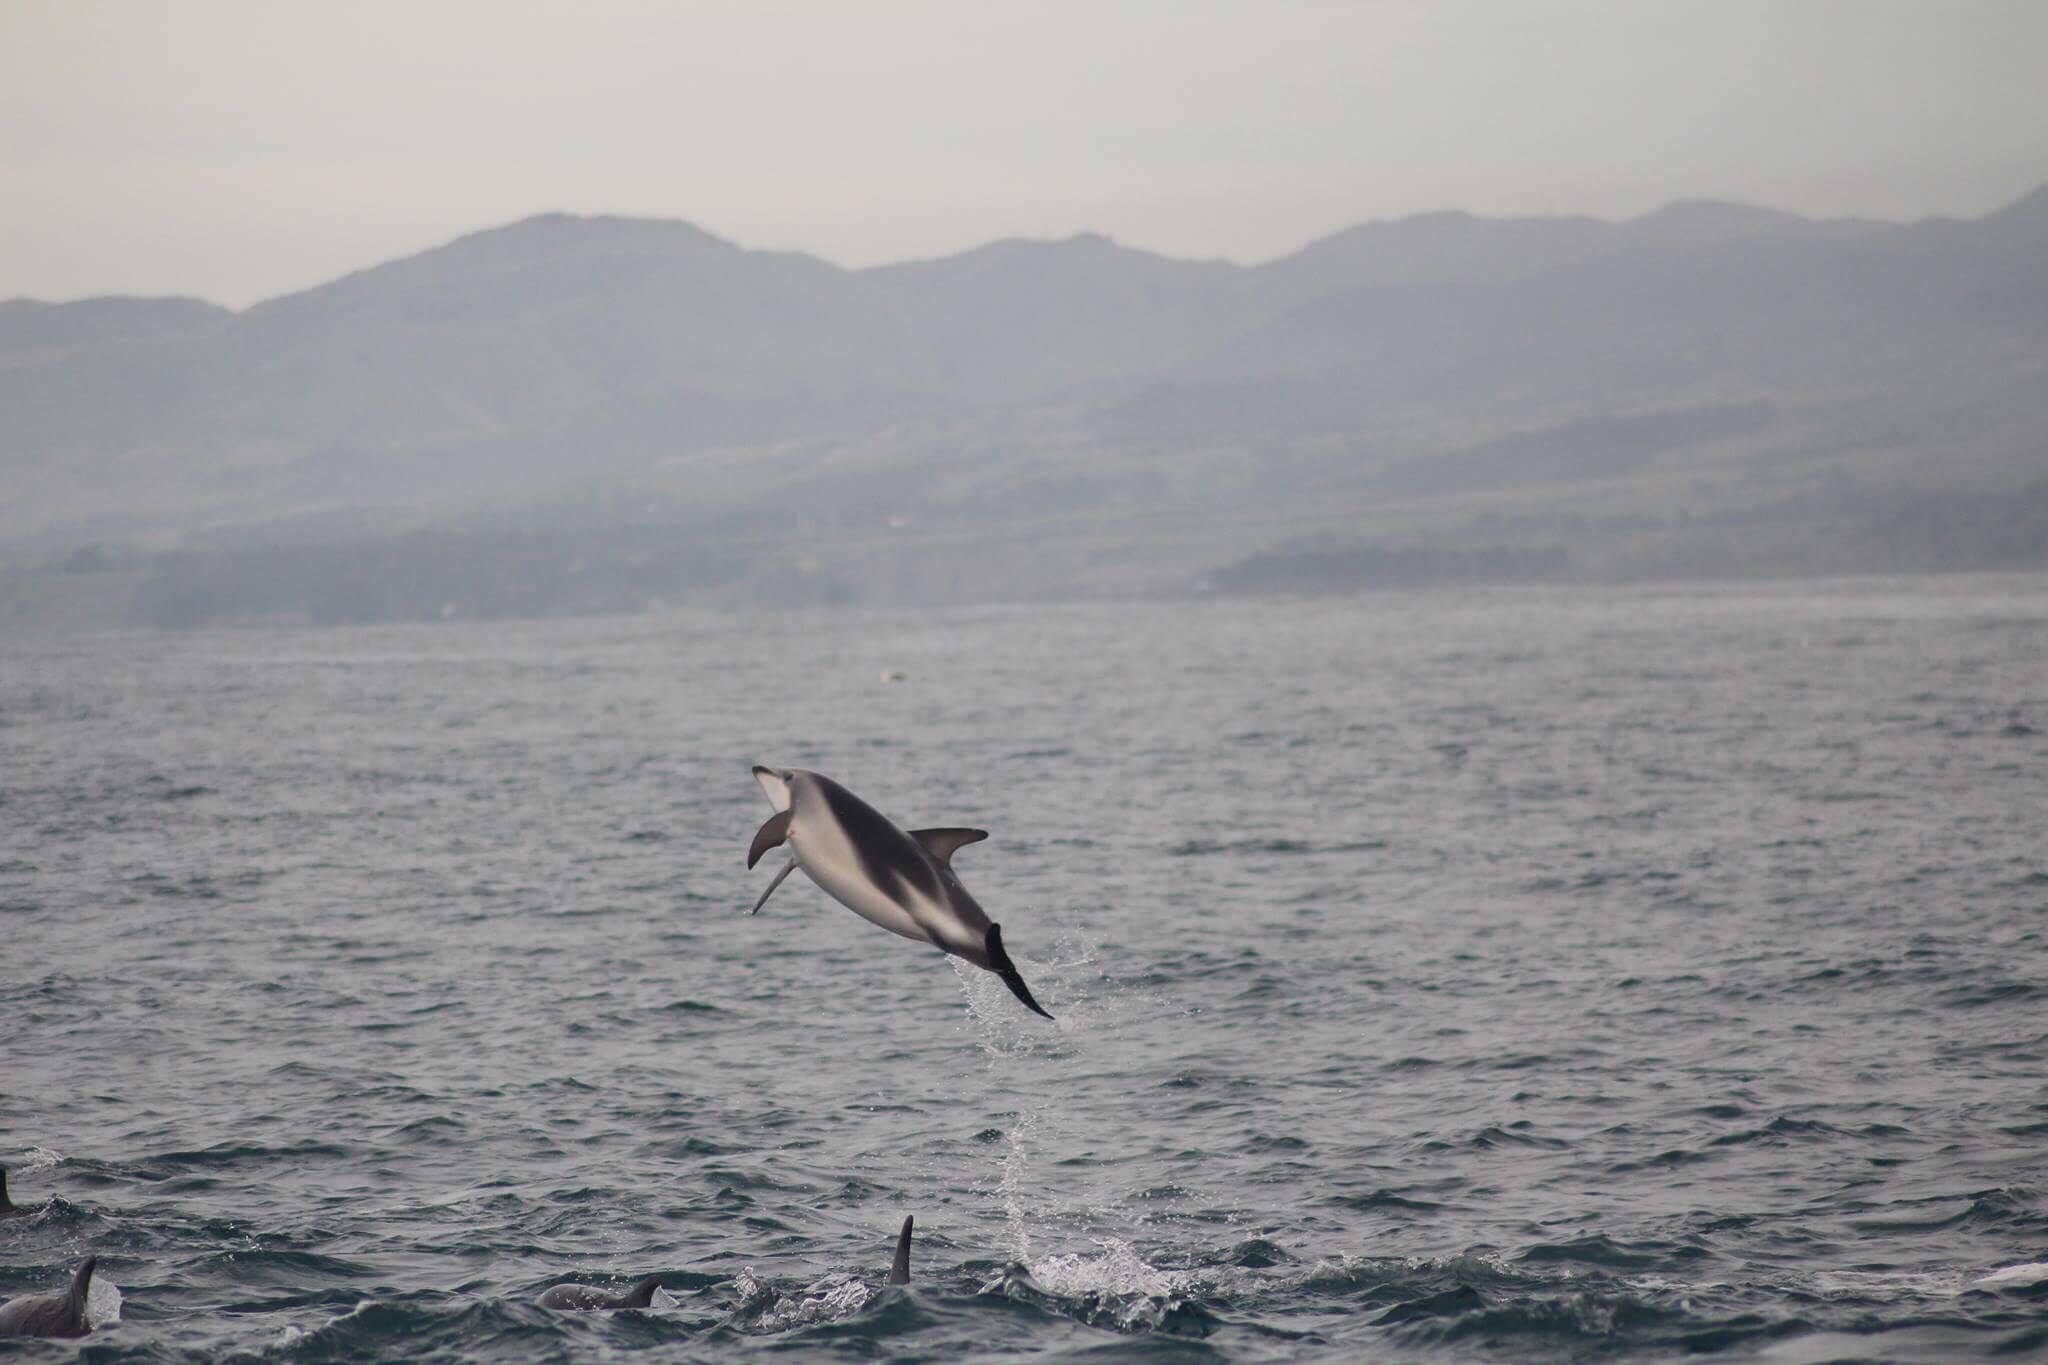 A Dusky Dolphin leaping into the air